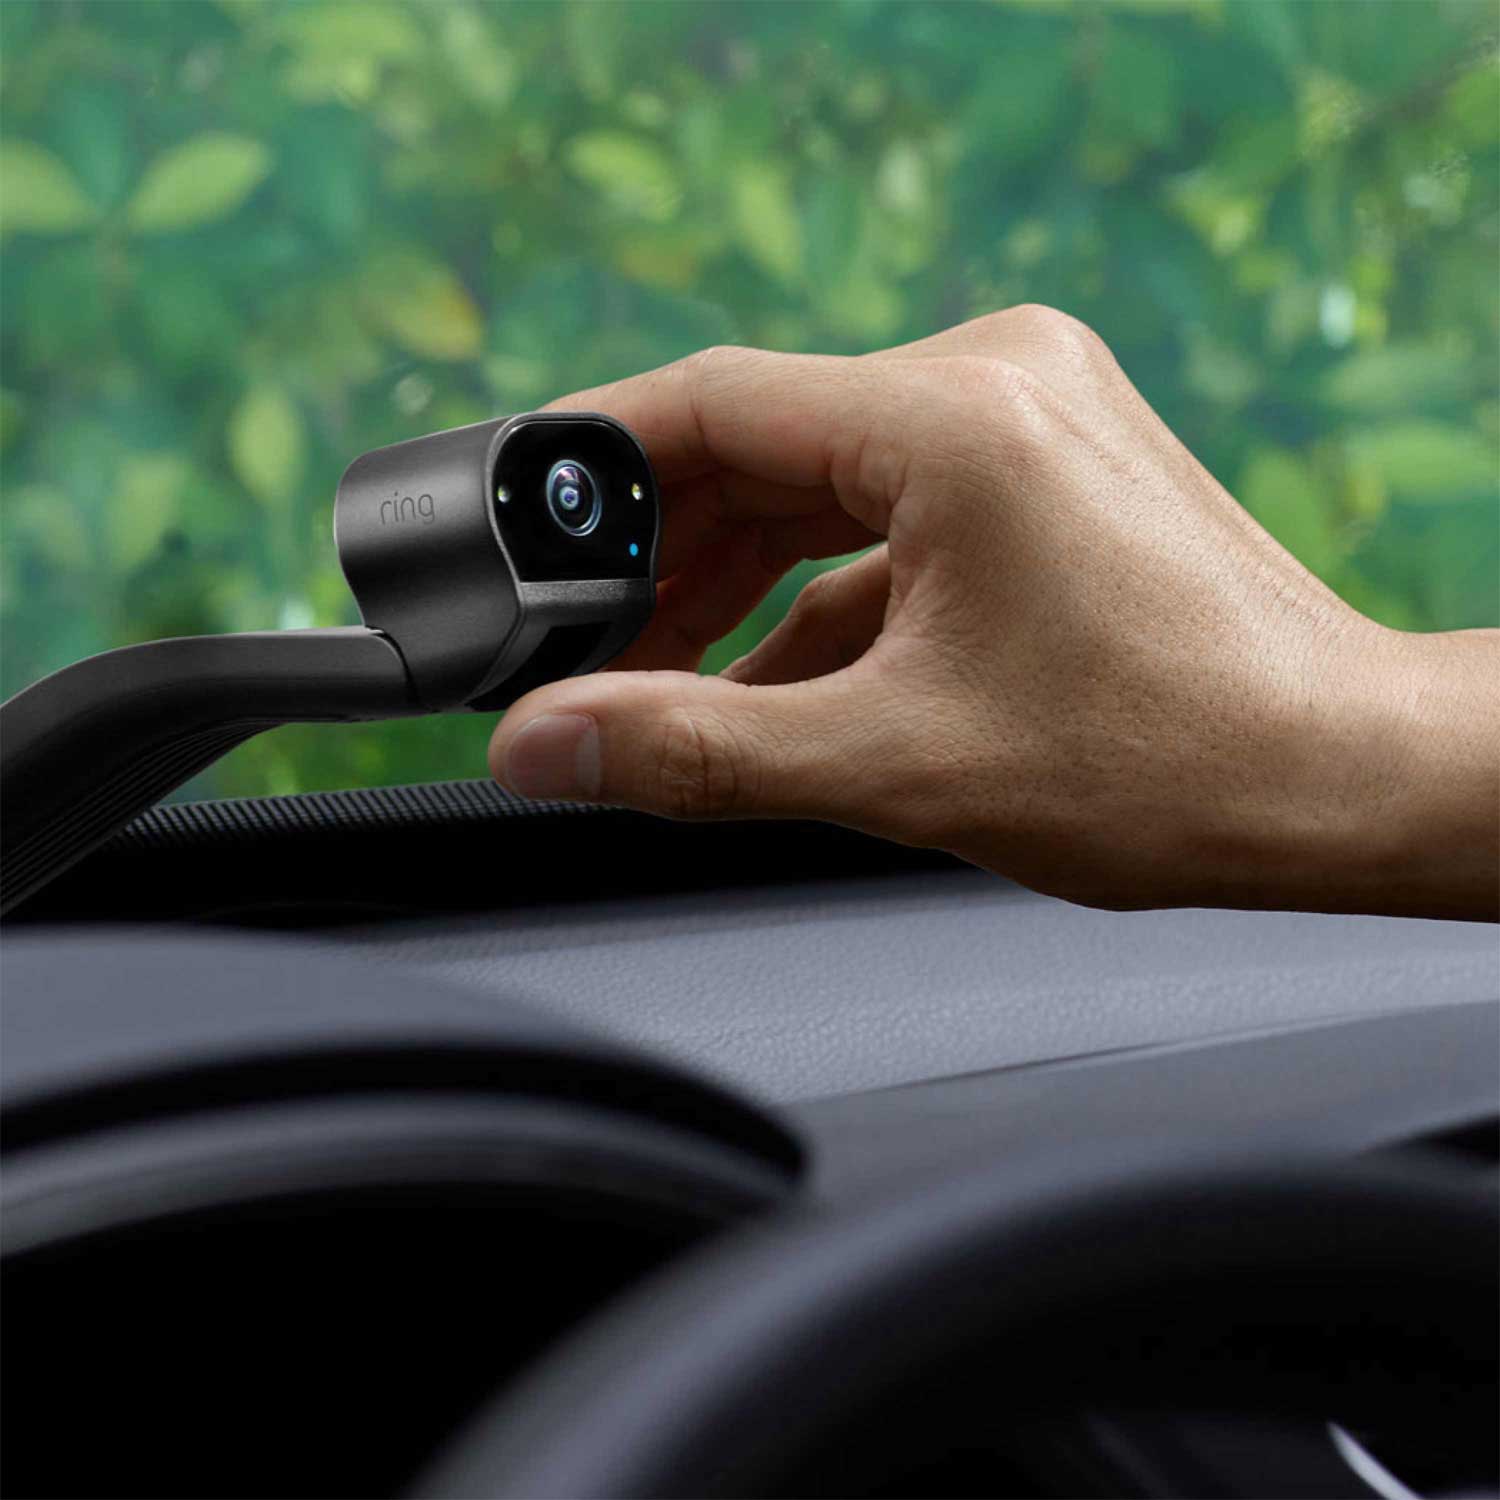 https://gmauthority.com/blog/wp-content/uploads/2023/02/Ring-Car-Cam-Two-Facing-Dashcam-In-Car-Security-Anti-Theft-Device-Camera-Video-Recorder-004.jpg